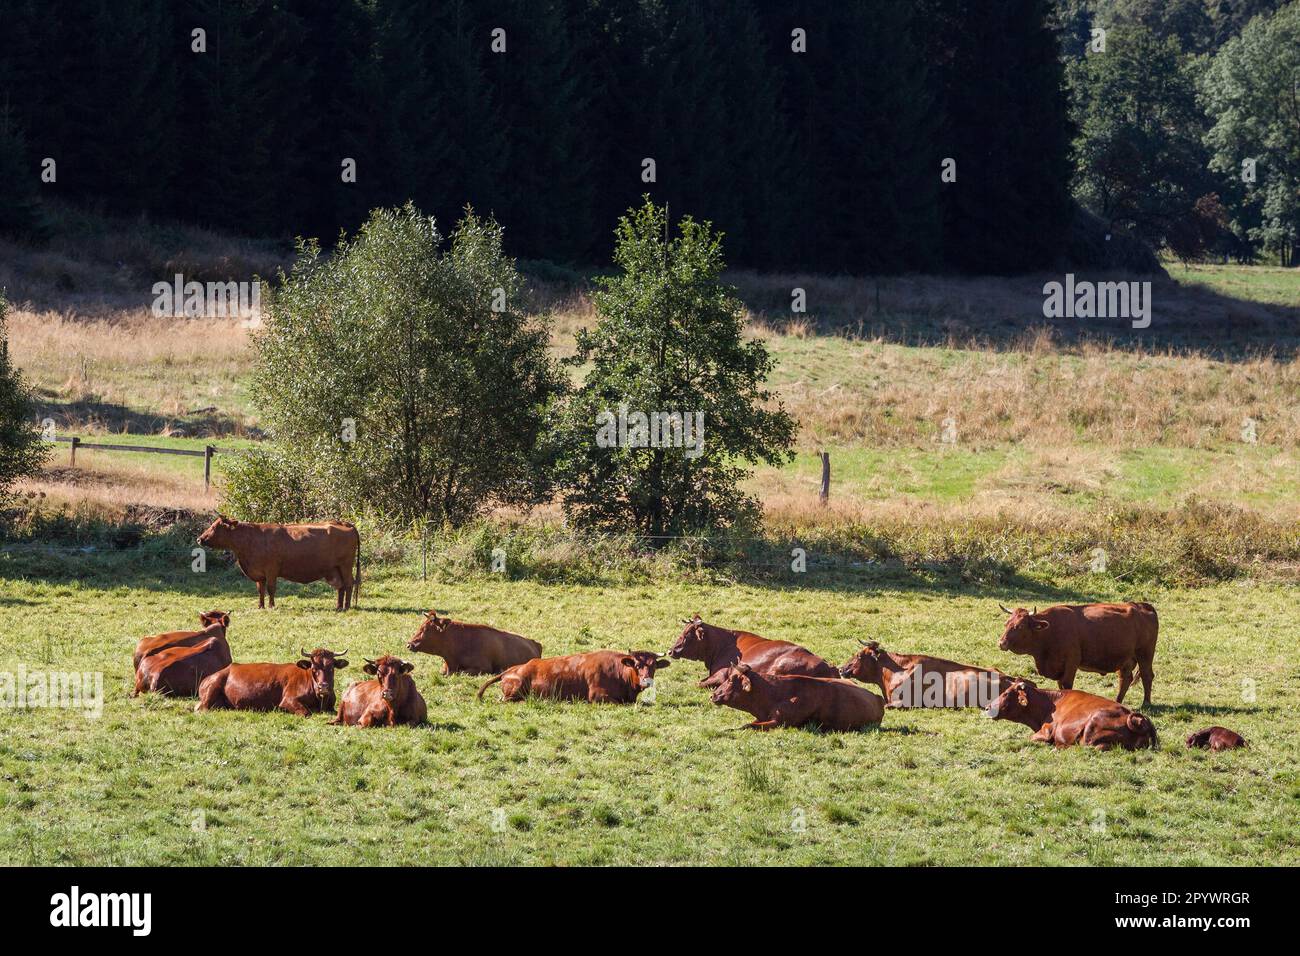 Herd of cattle on the pasture Stock Photo